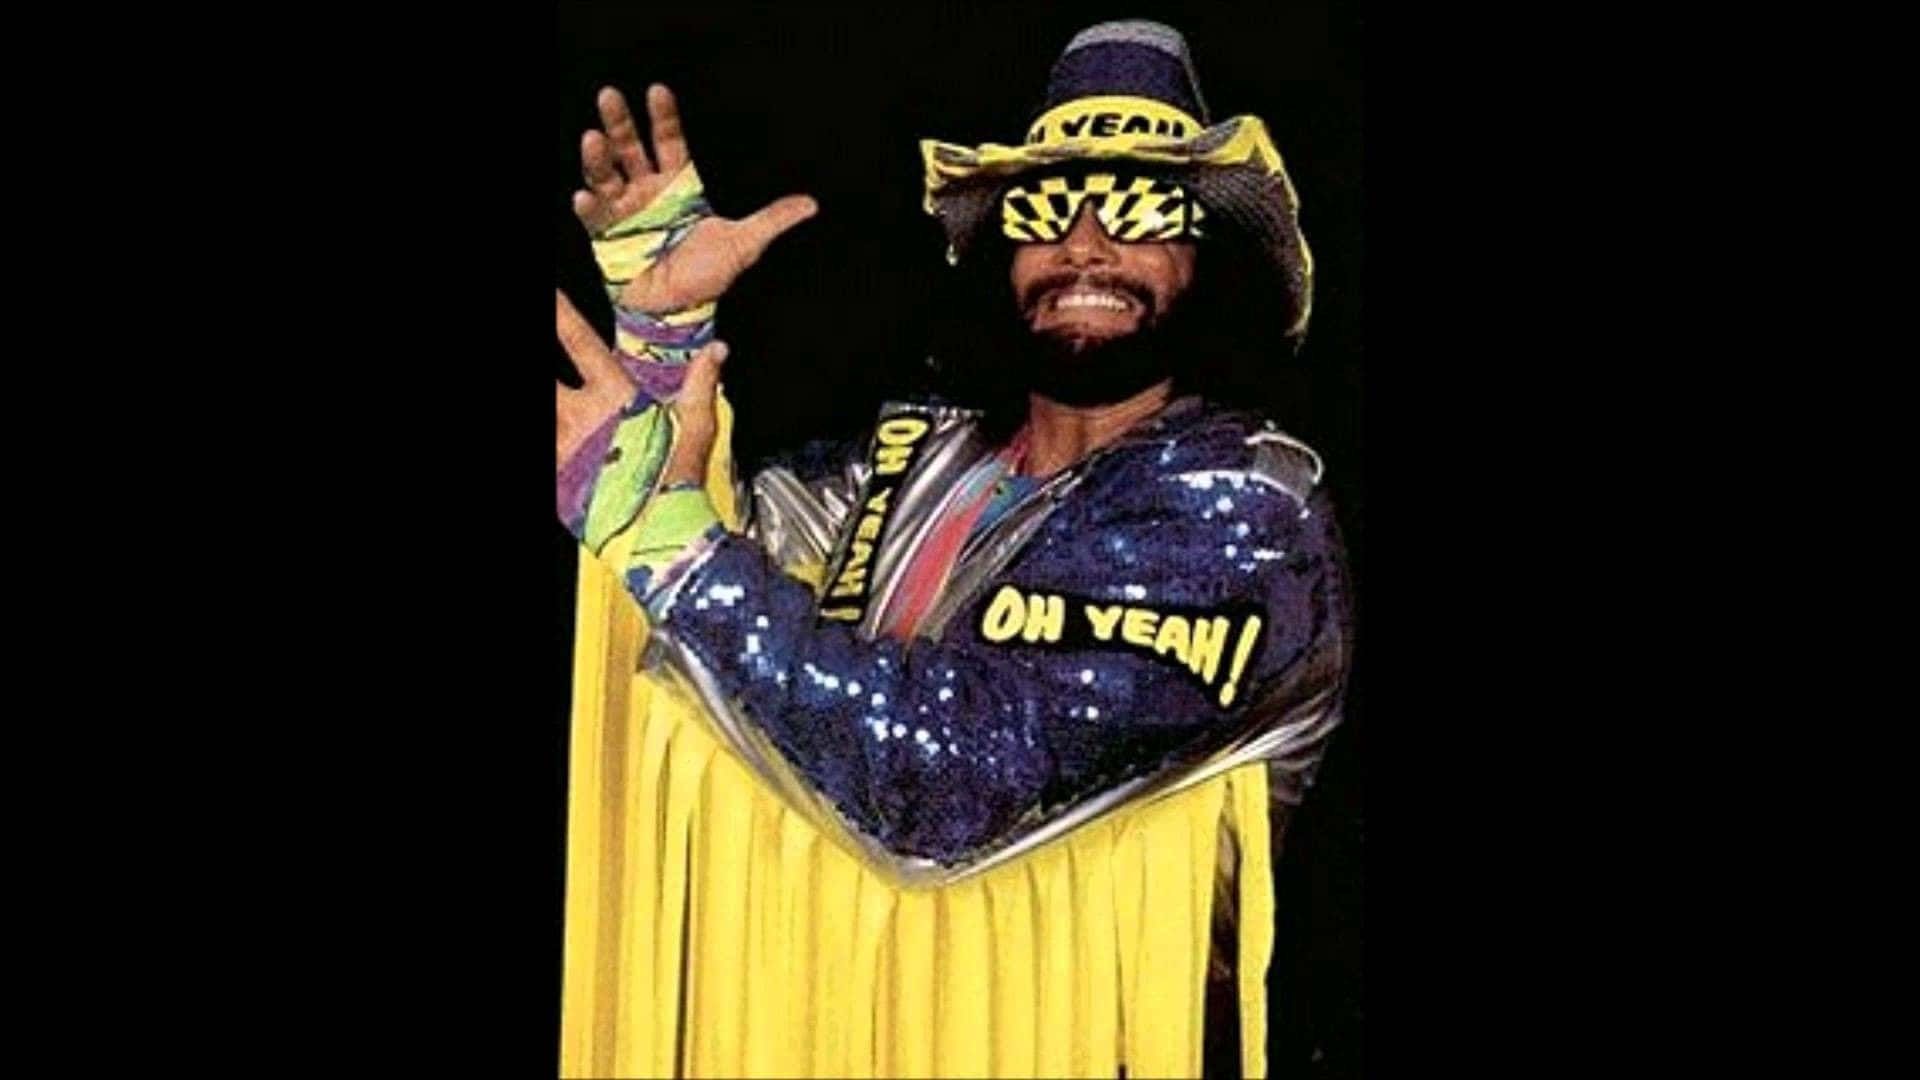 Randy Savage Oh Yeah Catchphrase Wallpaper